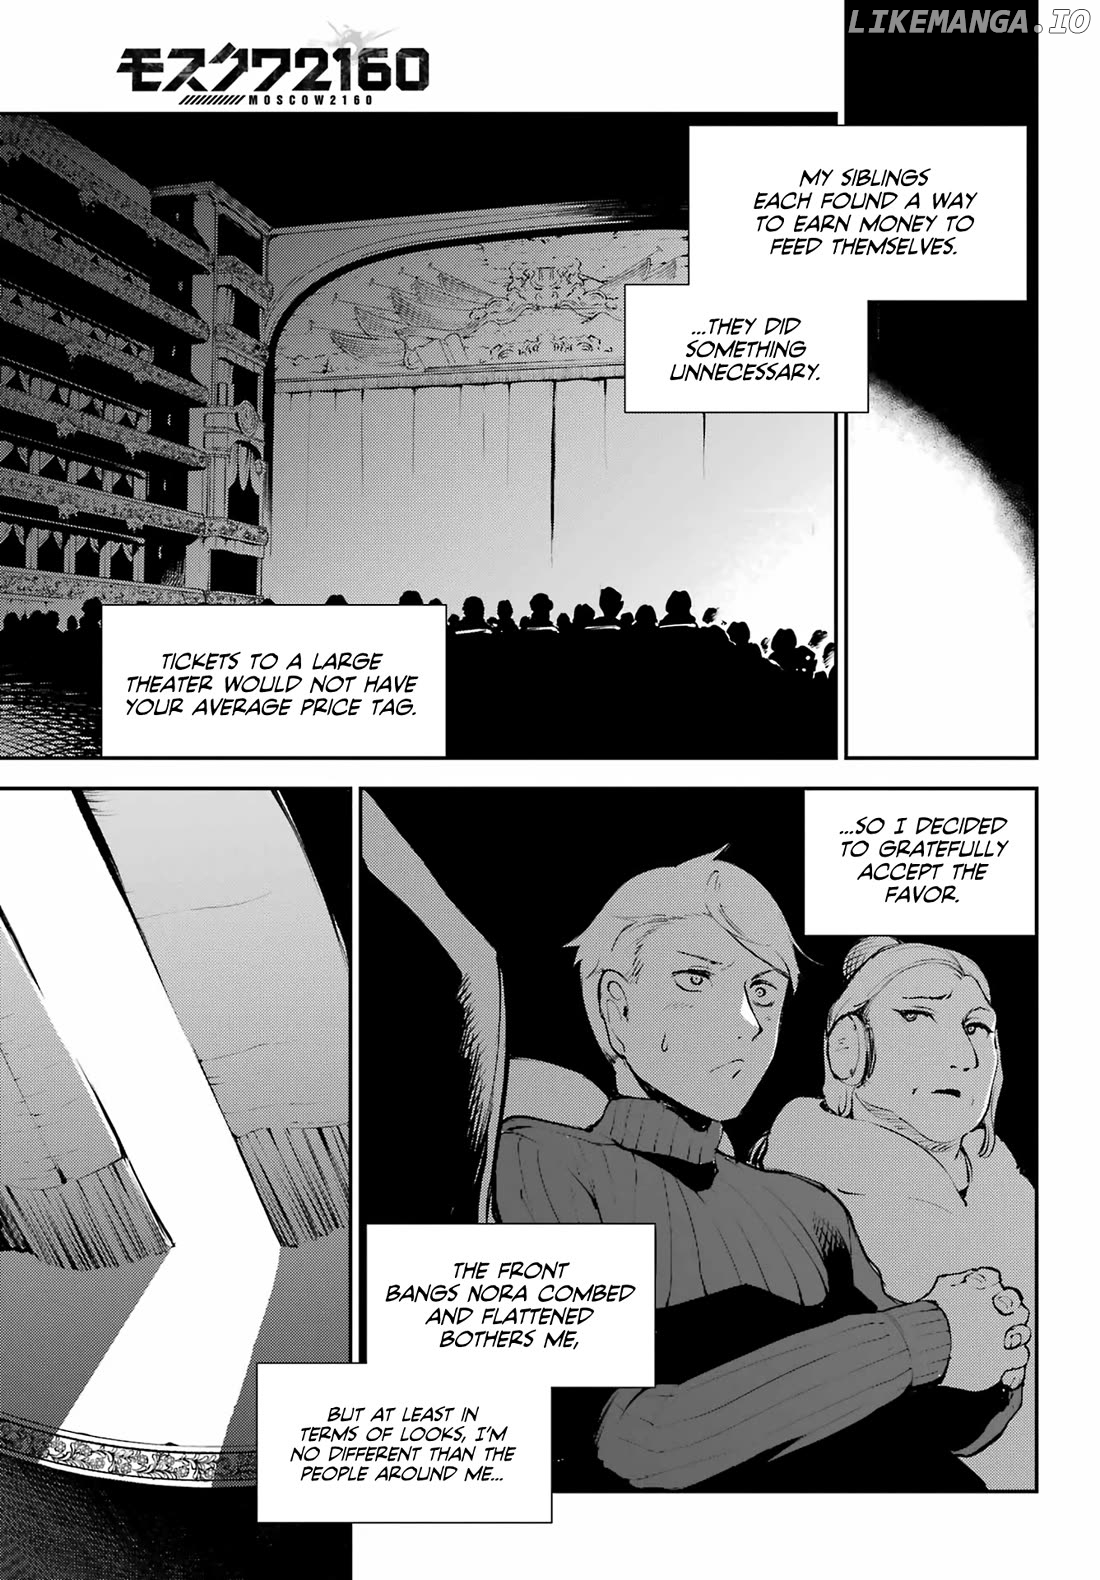 Moscow 2160 Chapter 10 - page 16